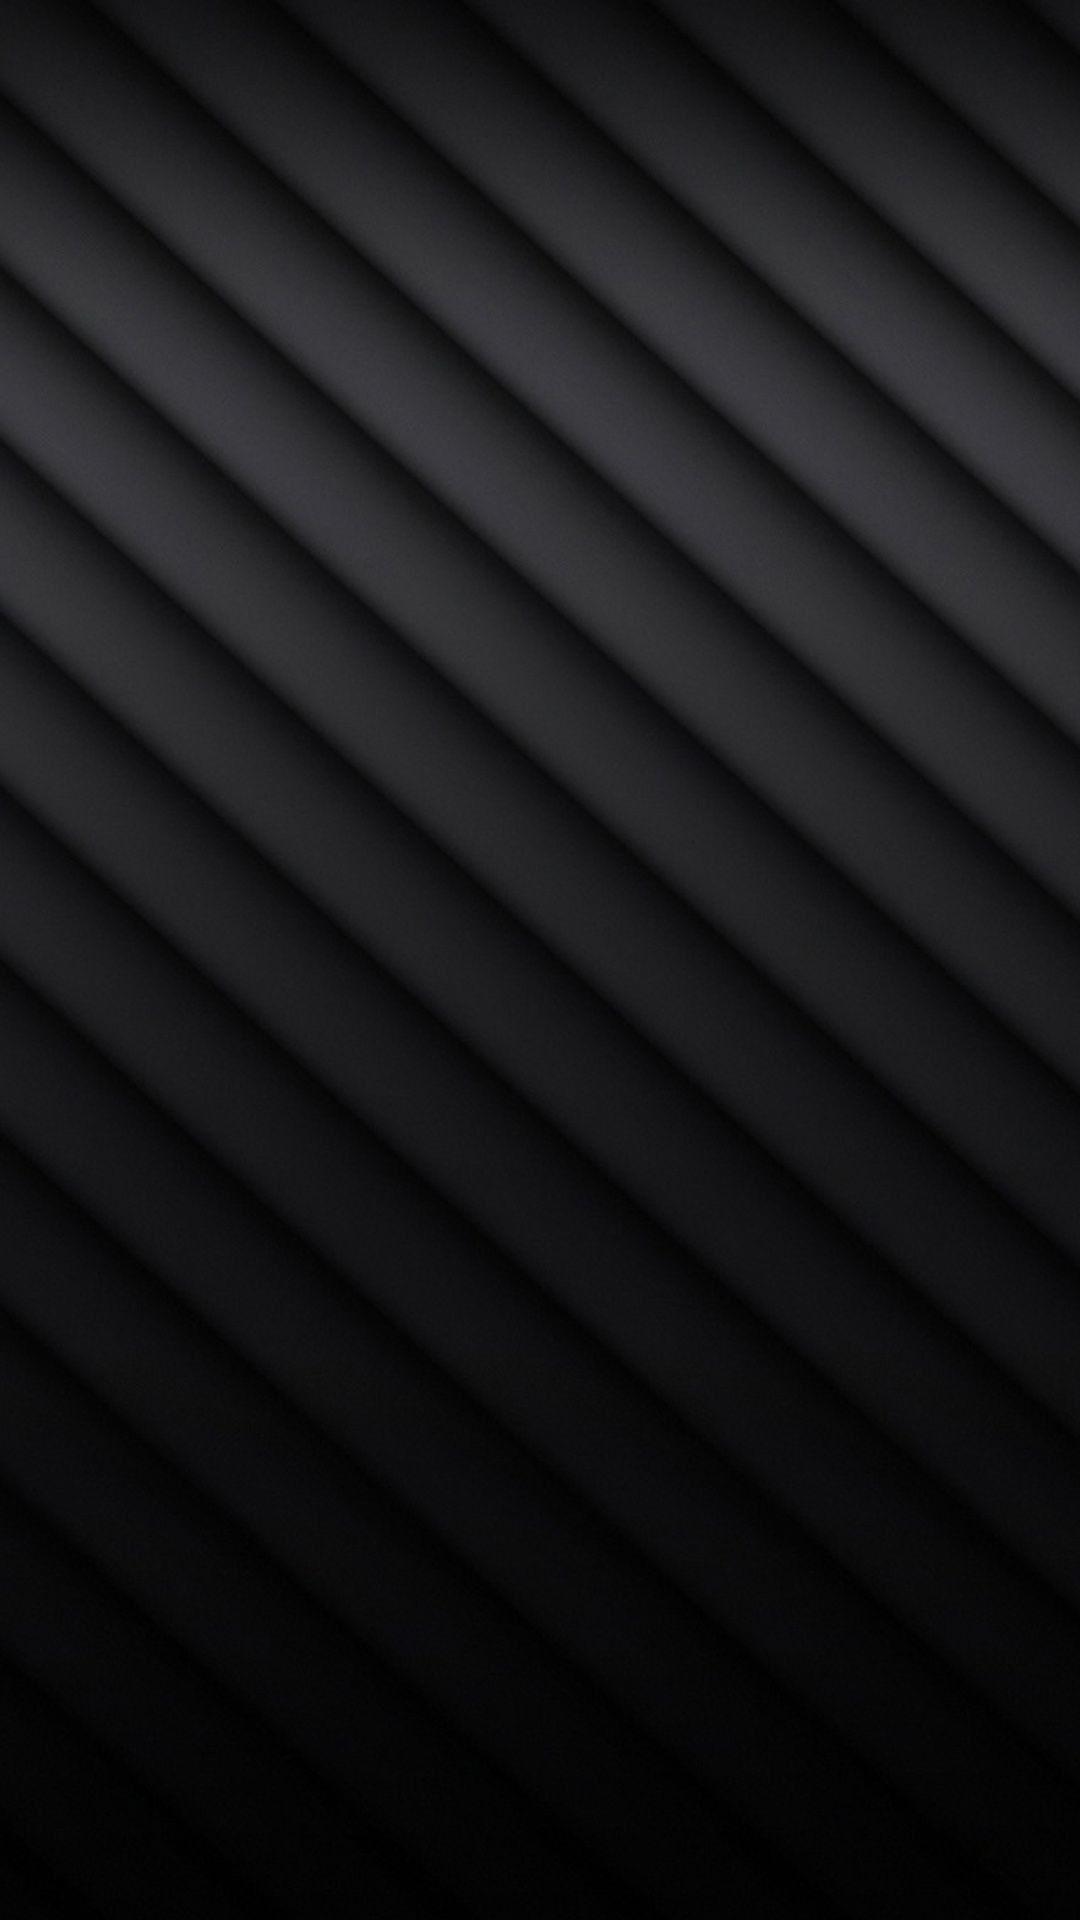 Pure Black Amoled Wallpapers - Top Free Pure Black Amoled Backgrounds